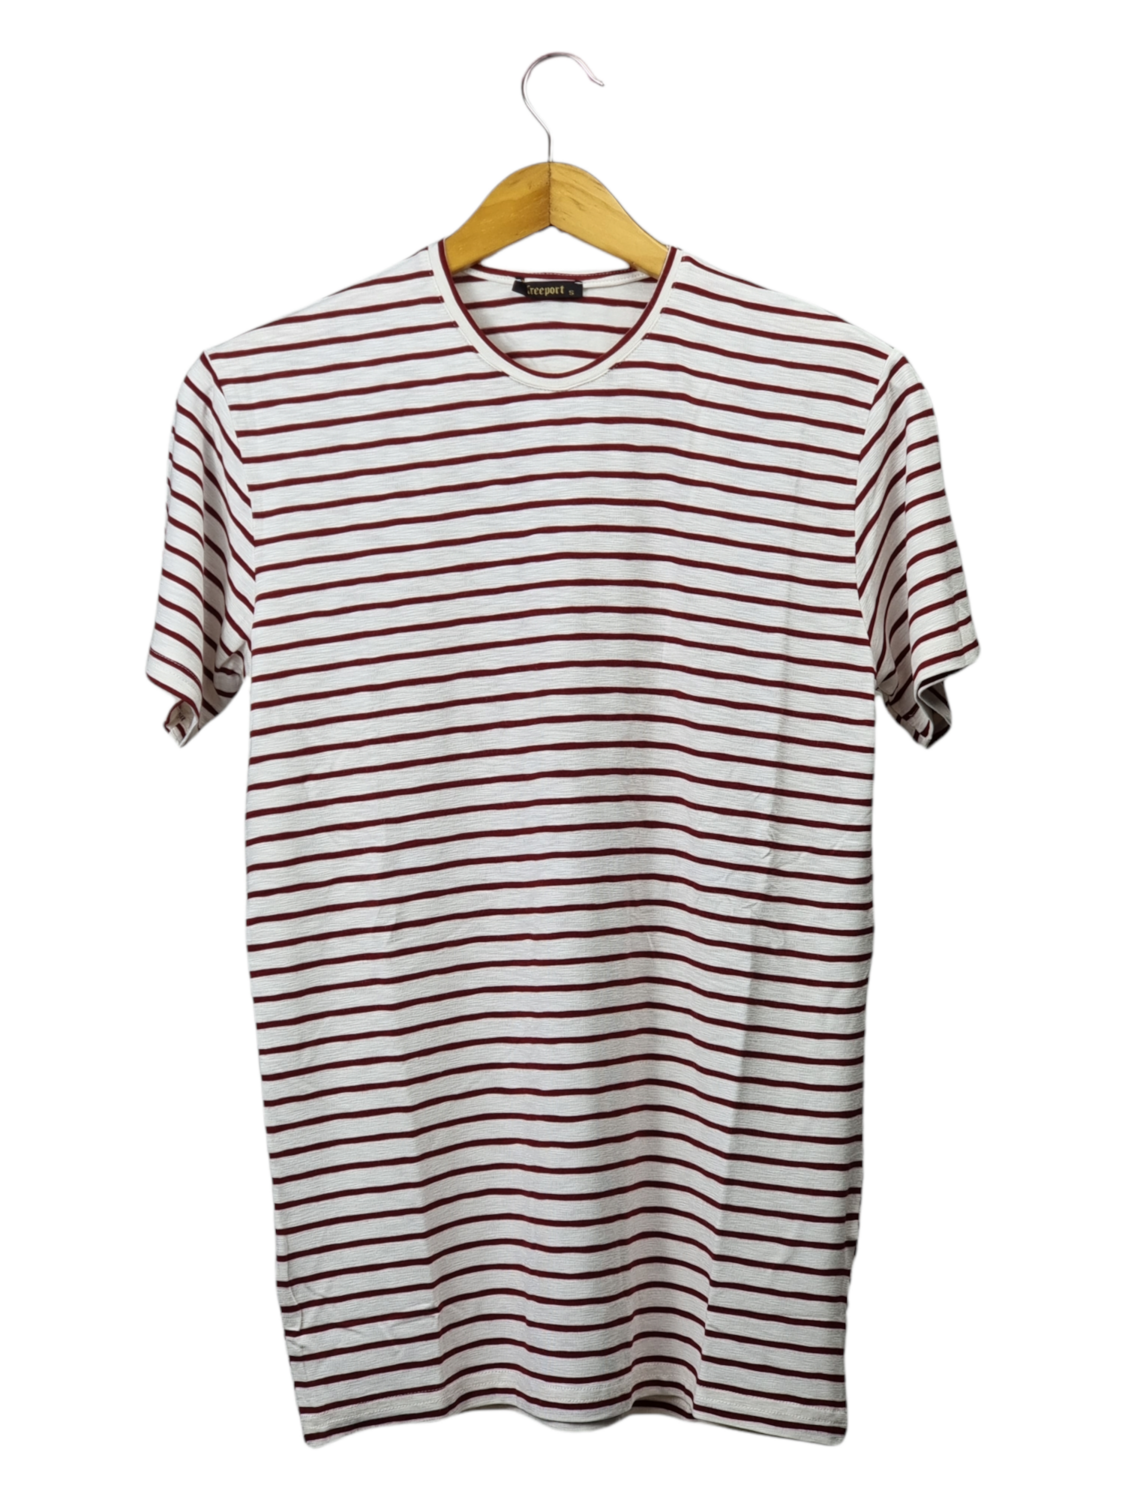 Red and cream color striped T-shirt